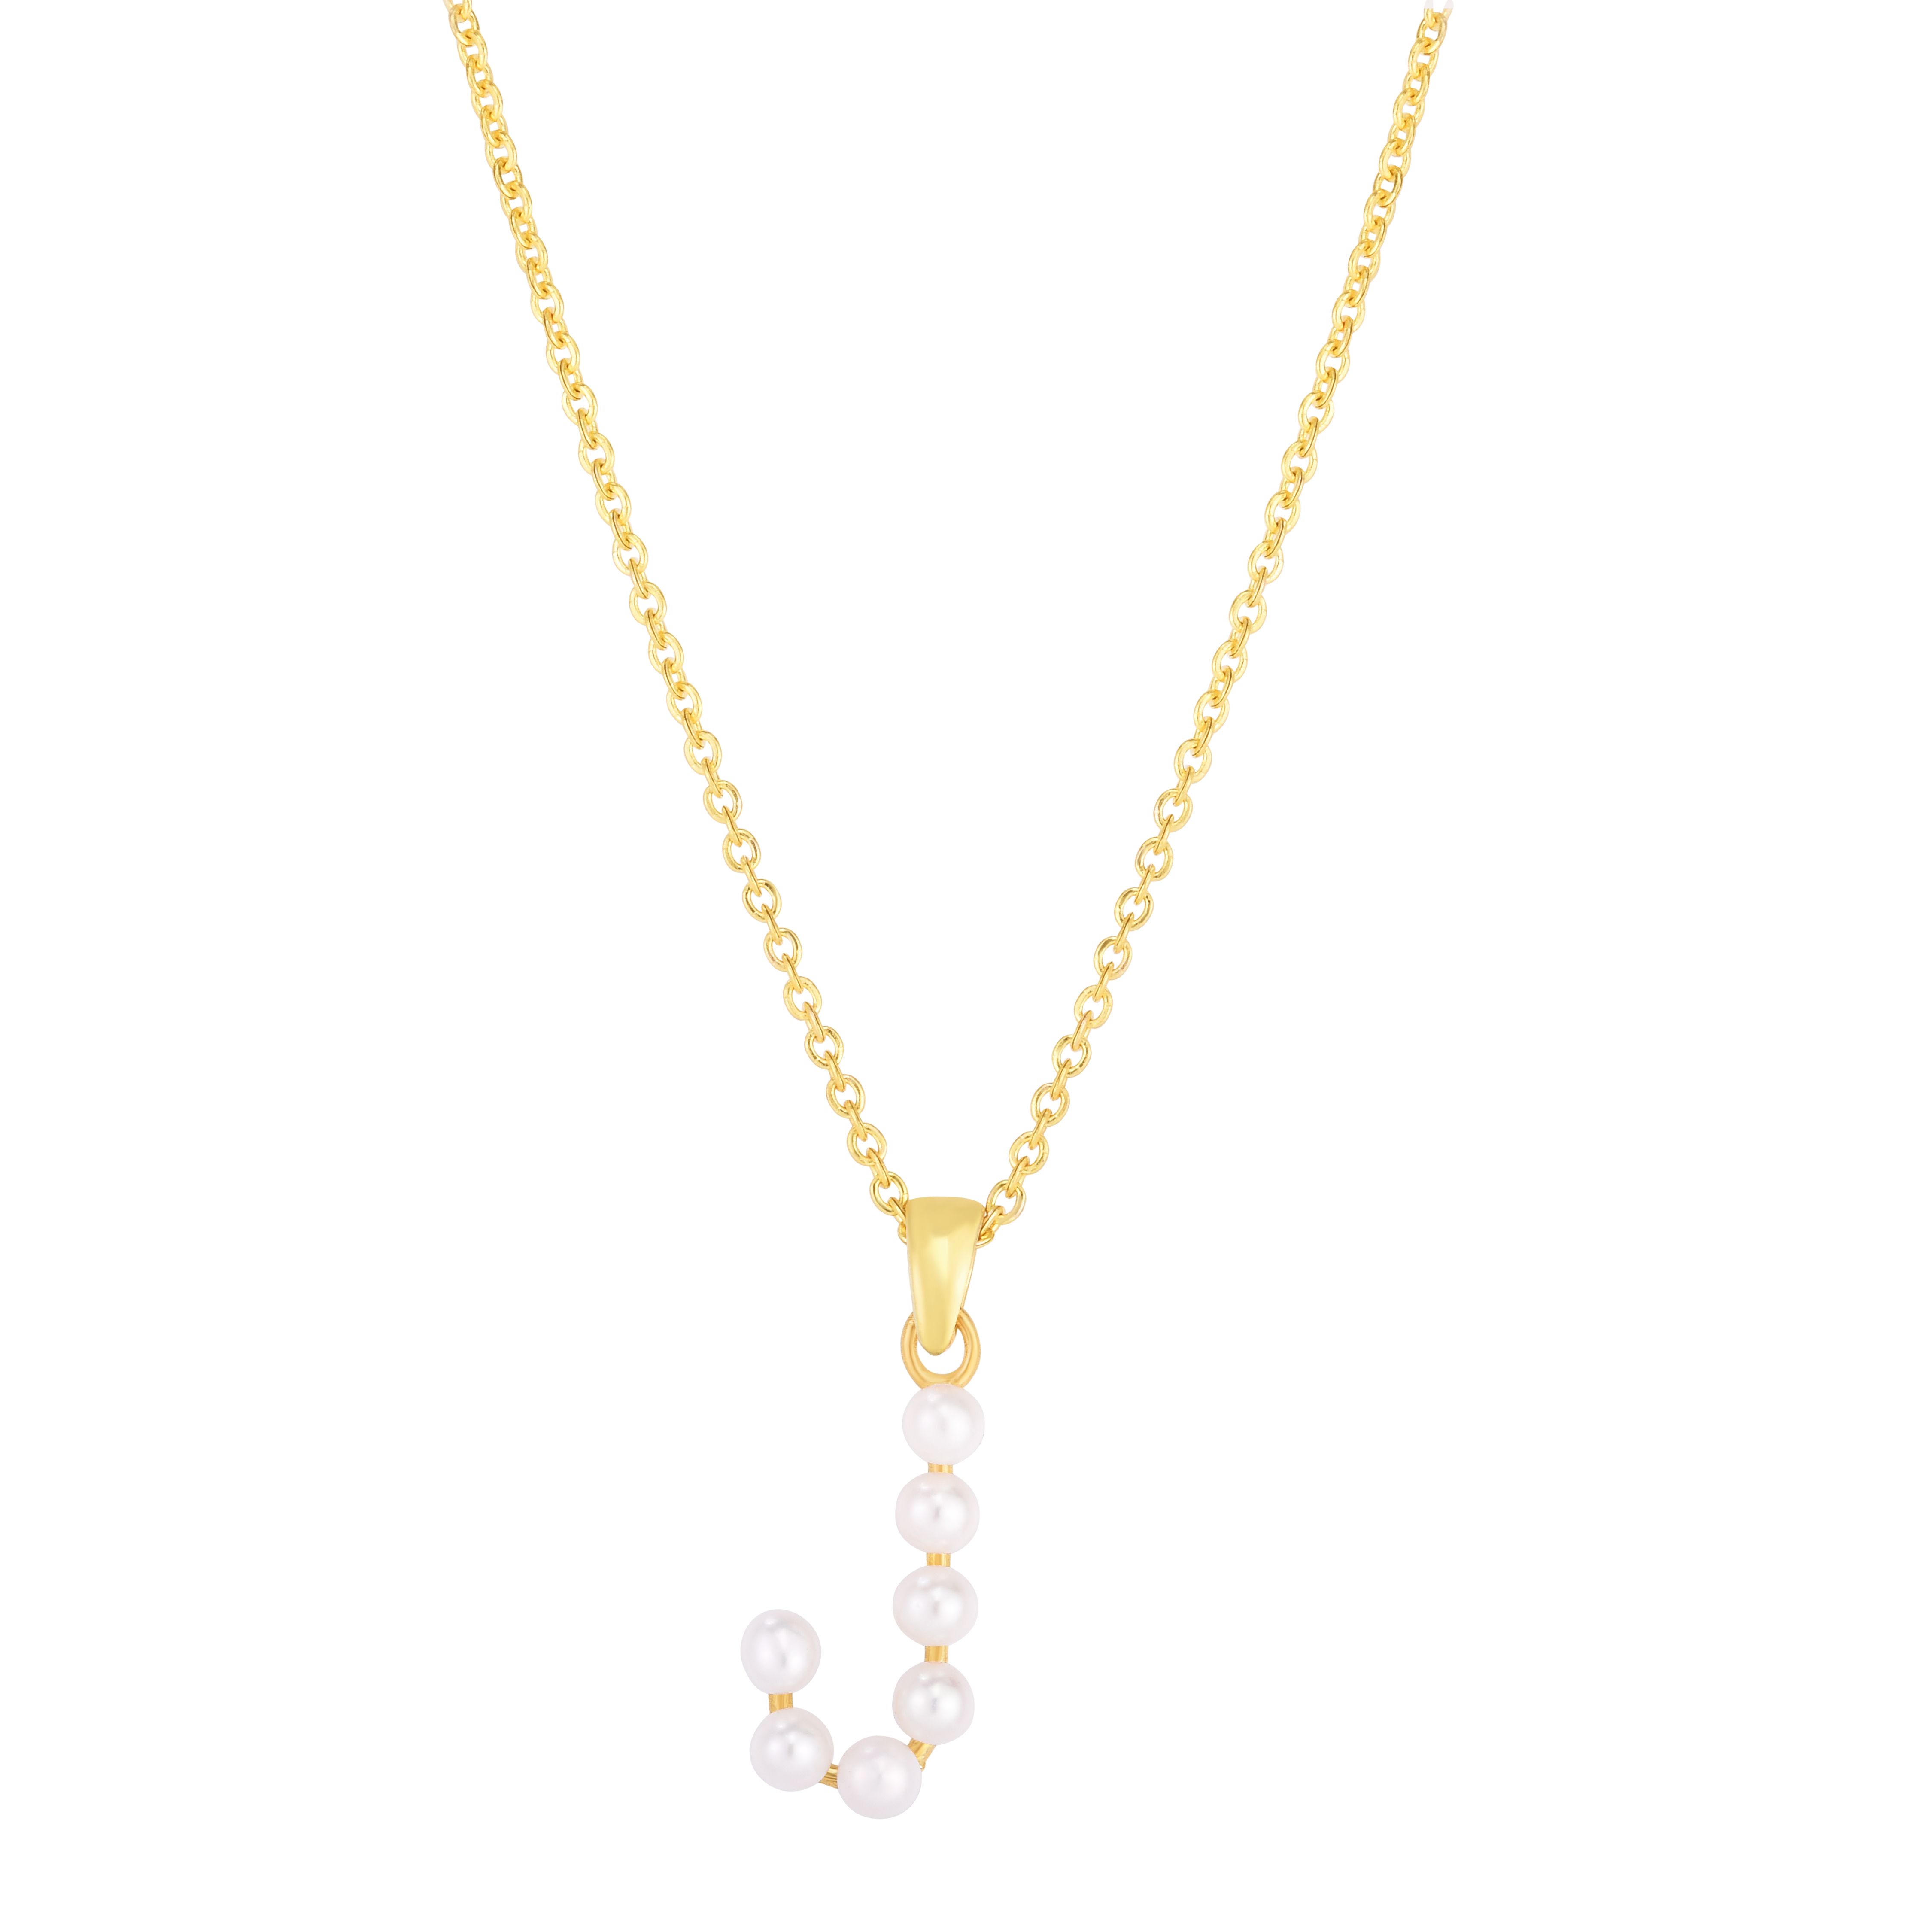 GOLD CUSTOM INITIAL GEMSTONE PEARL NECKLACE - FIVE FOURTY NINE